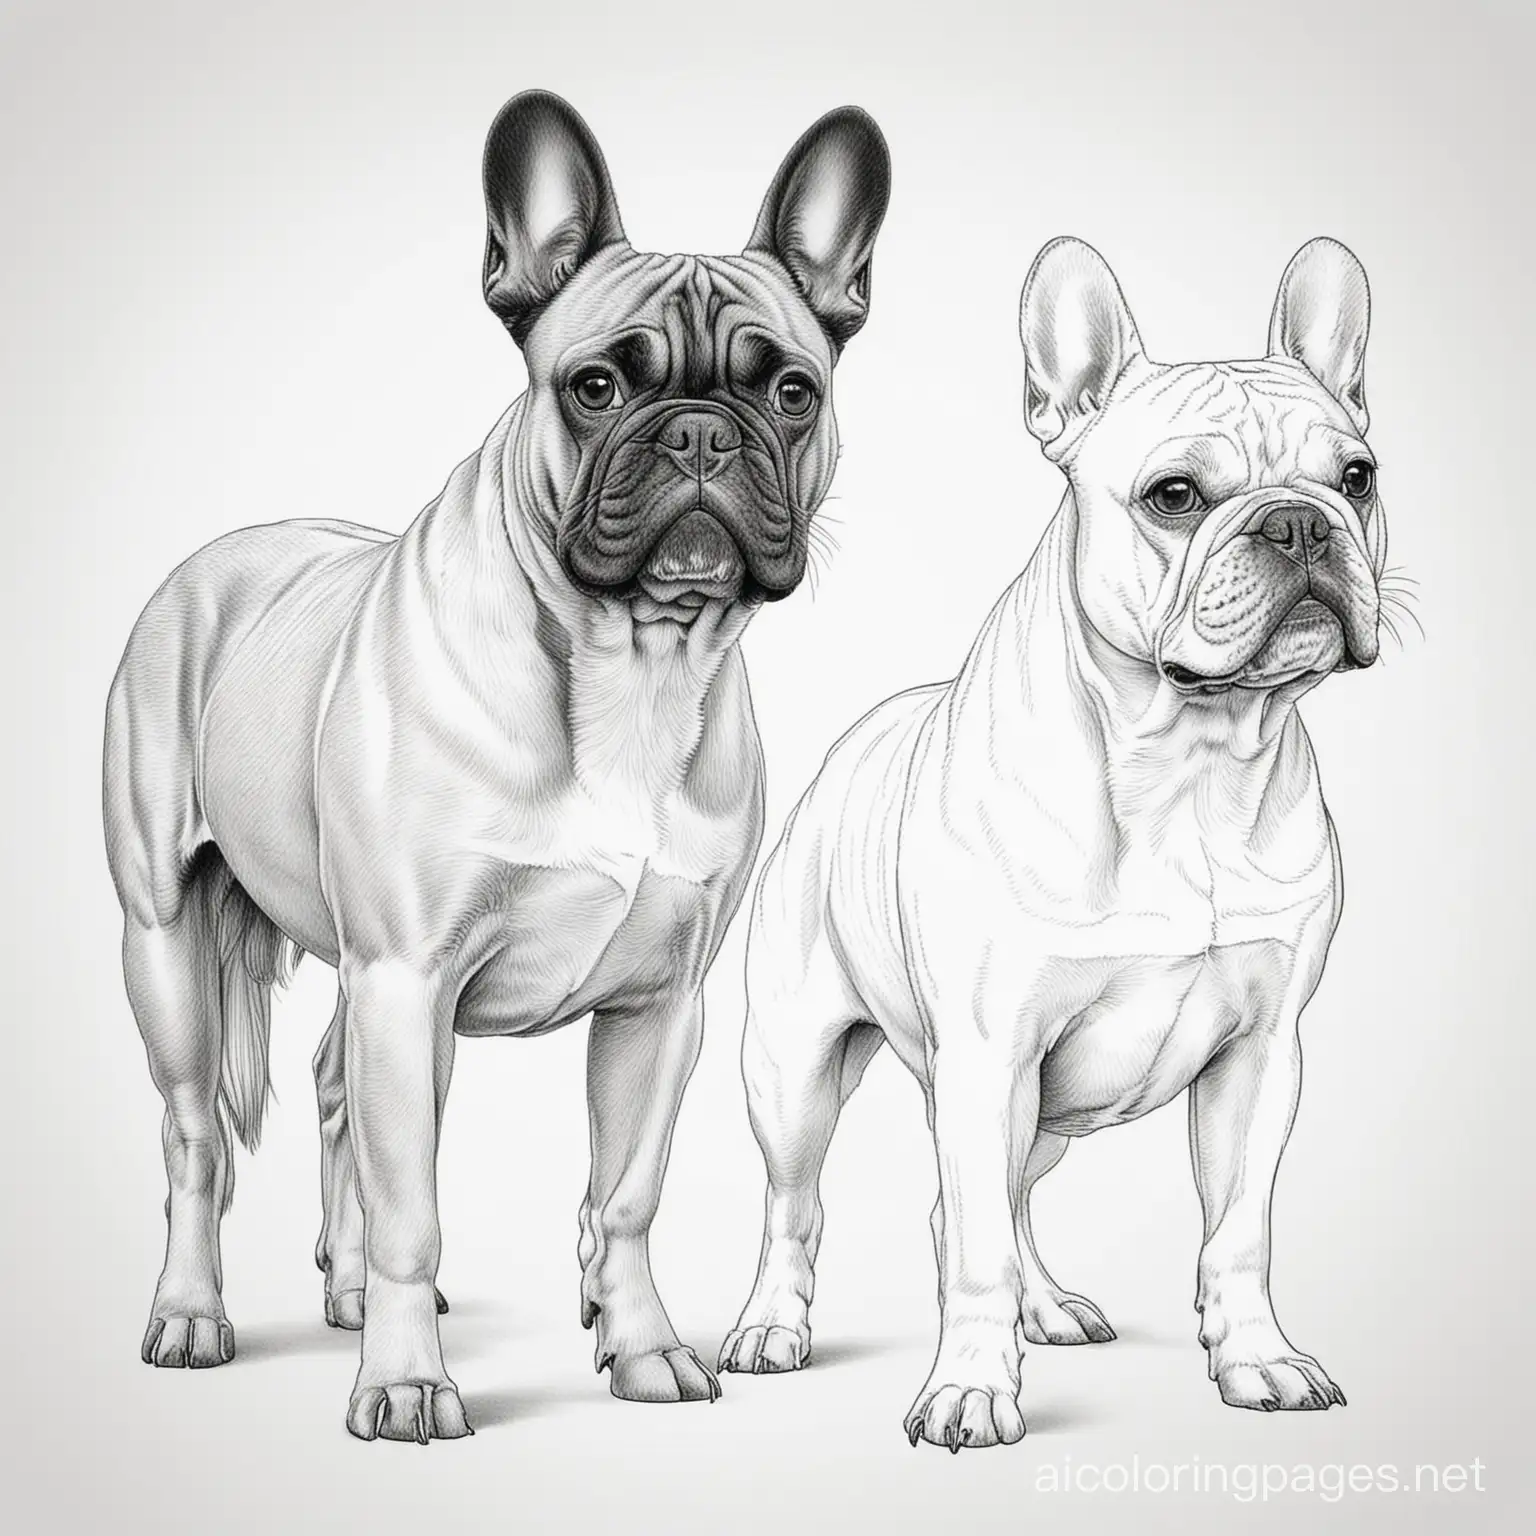  horse and a French bulldog
, Coloring Page, black and white, line art, white background, Simplicity, Ample White Space. The background of the coloring page is plain white to make it easy for young children to color within the lines. The outlines of all the subjects are easy to distinguish, making it simple for kids to color without too much difficulty